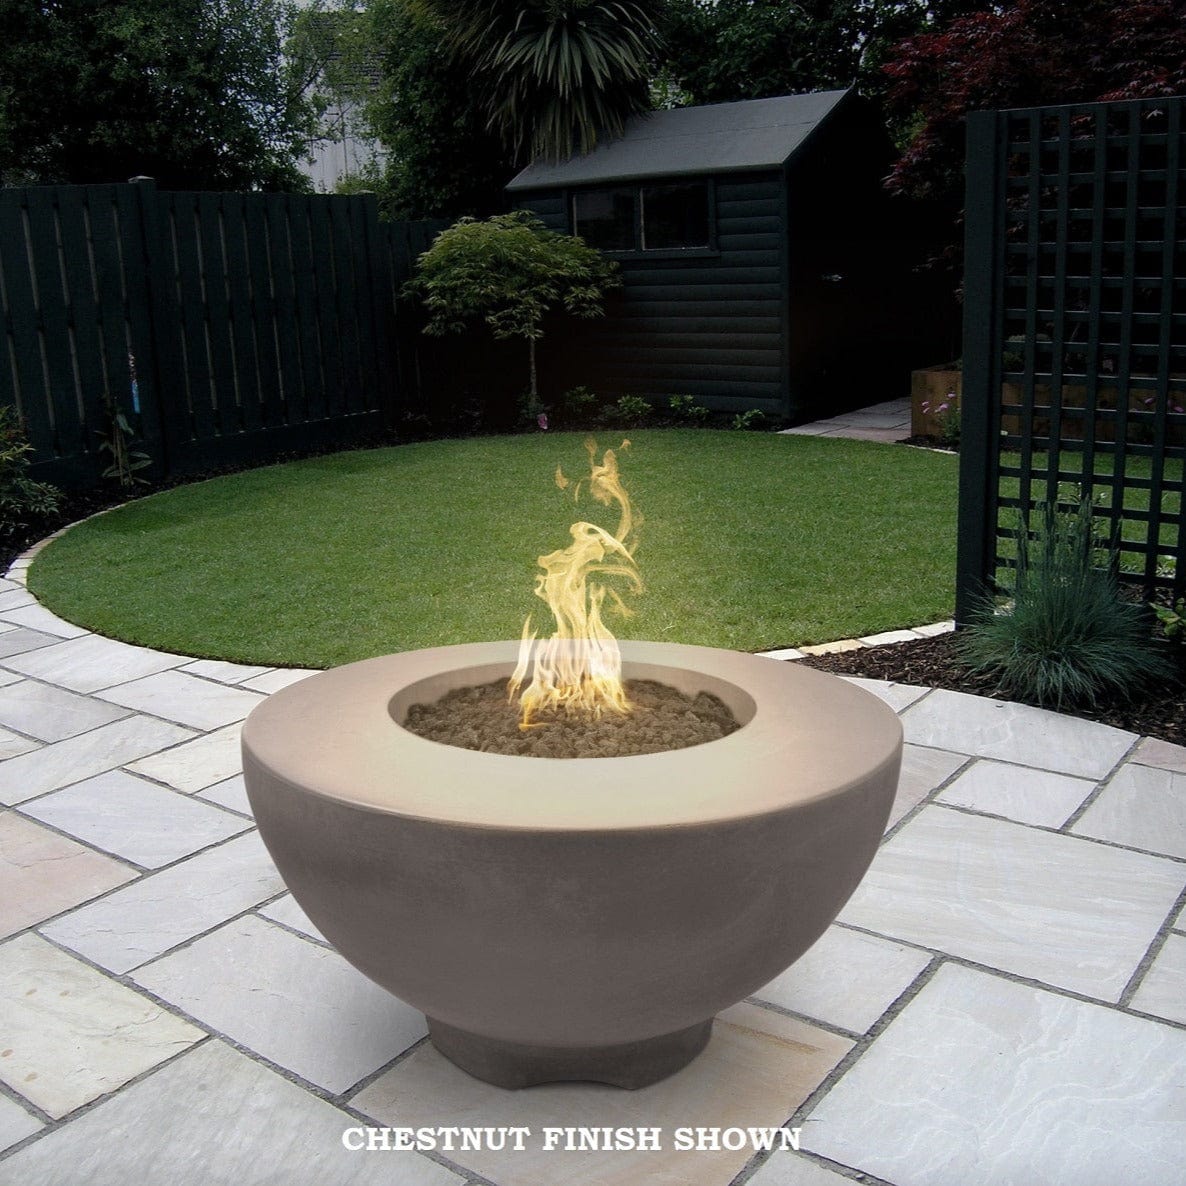 The Outdoor Plus Fire Features The Outdoor Plus 37&quot; Round Sienna Fire Pit in Solid Concrete Finishes / OPT-RF37, OPT-RF37FSML, OPT-RF37FSEN, OPT-RF37E12V, OPT-RF37EKIT